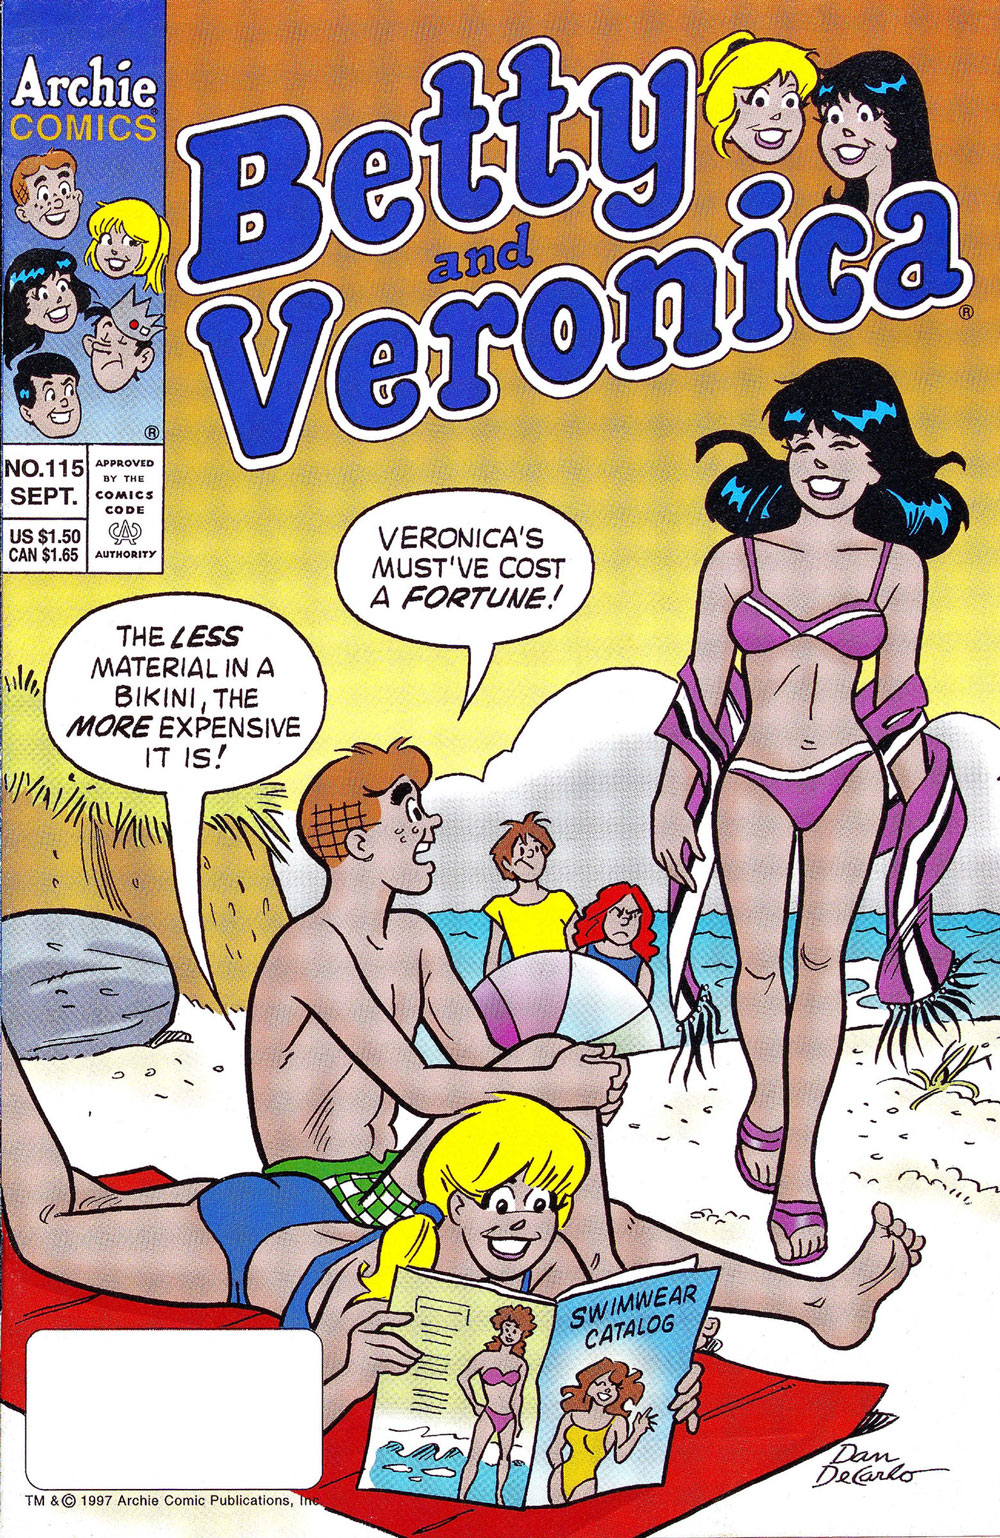 The cover of BETTY AND VERONICA #115. Betty, Archie, and Veronica are on the beach and Archie makes a joke about Veronica's bikini.